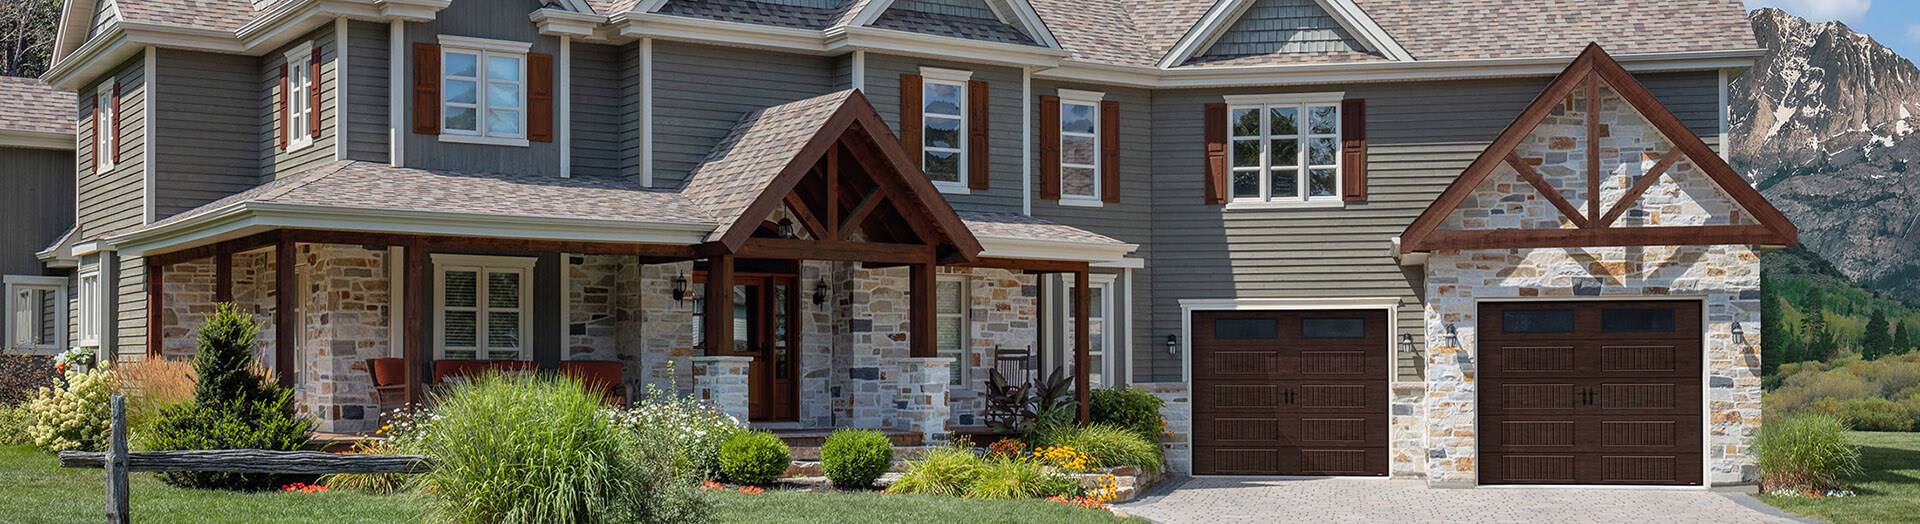 Luxurious Transitional Exterior Home Design. 2-storey home, gray siding, stone and wood with 2 single garage door in Dark Walnut color